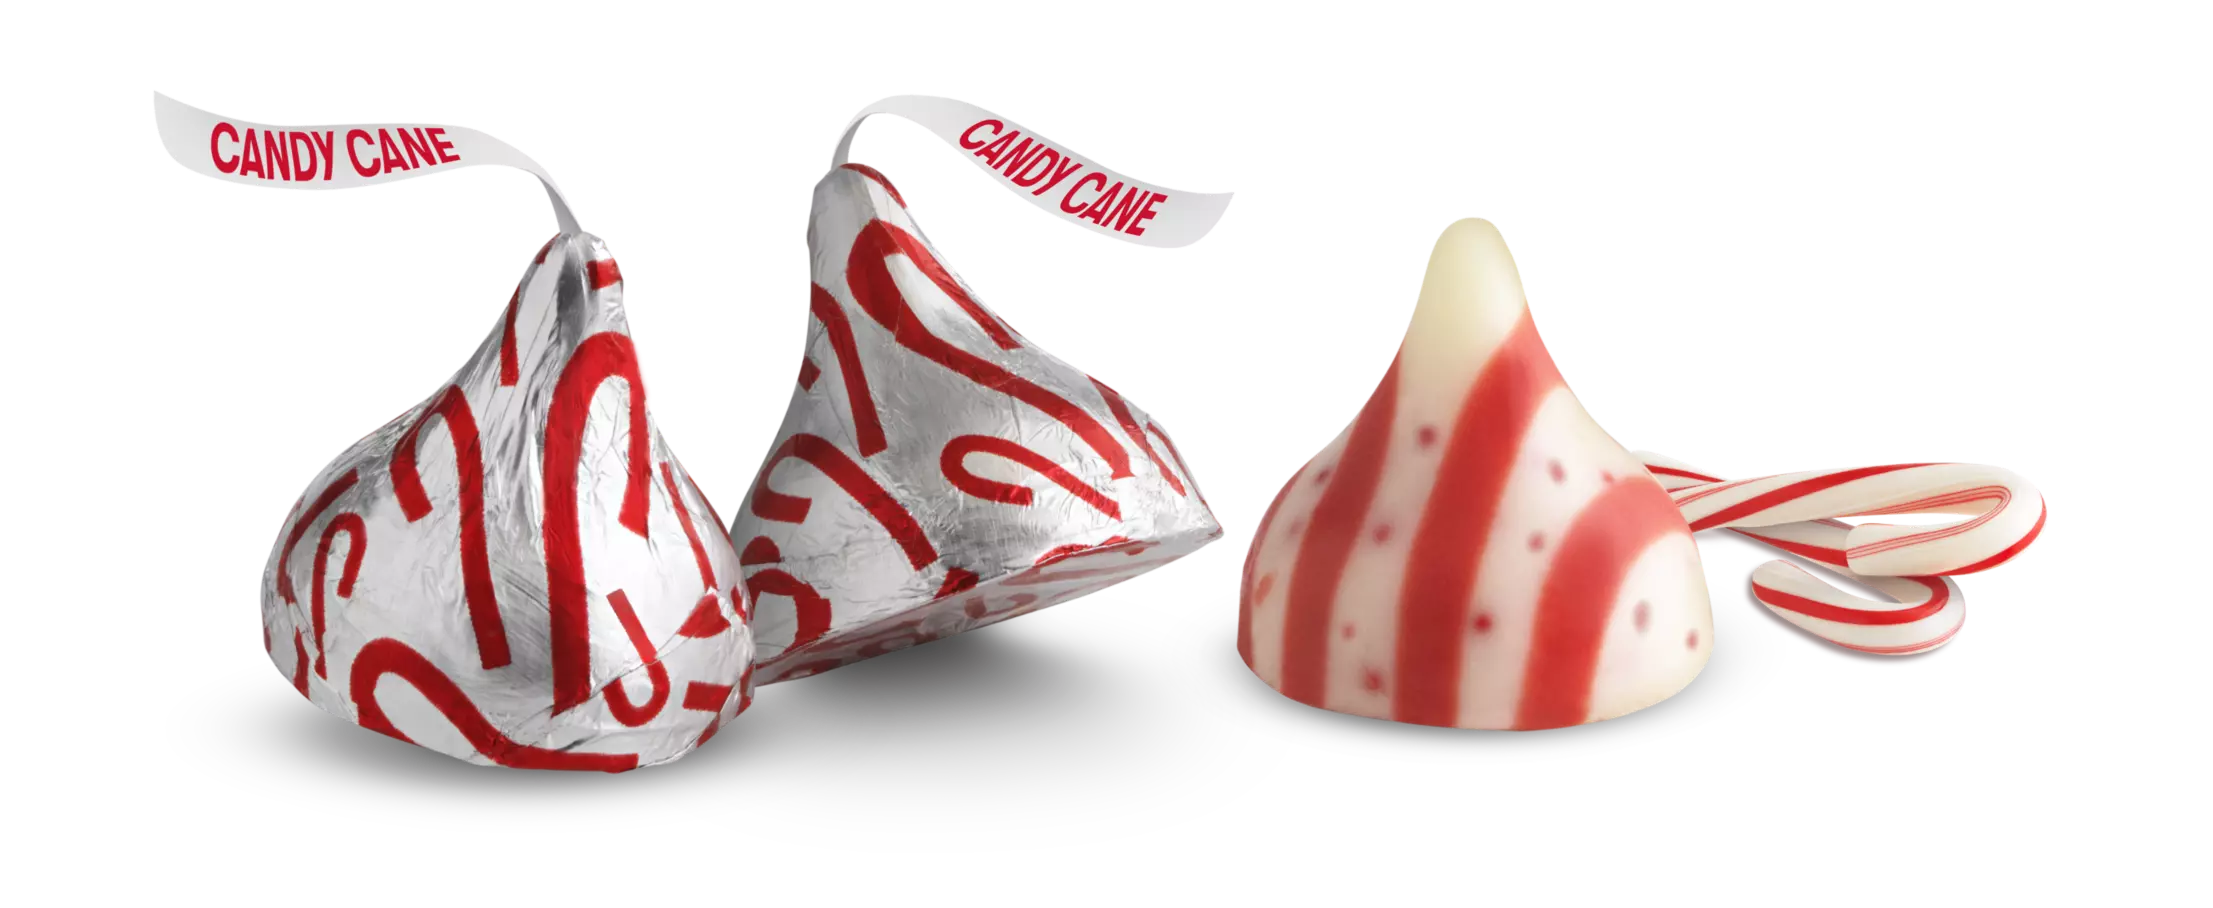 HERSHEY'S KISSES Candy Cane Flavored Mint Candy, 30.1 oz bag - Out of Package